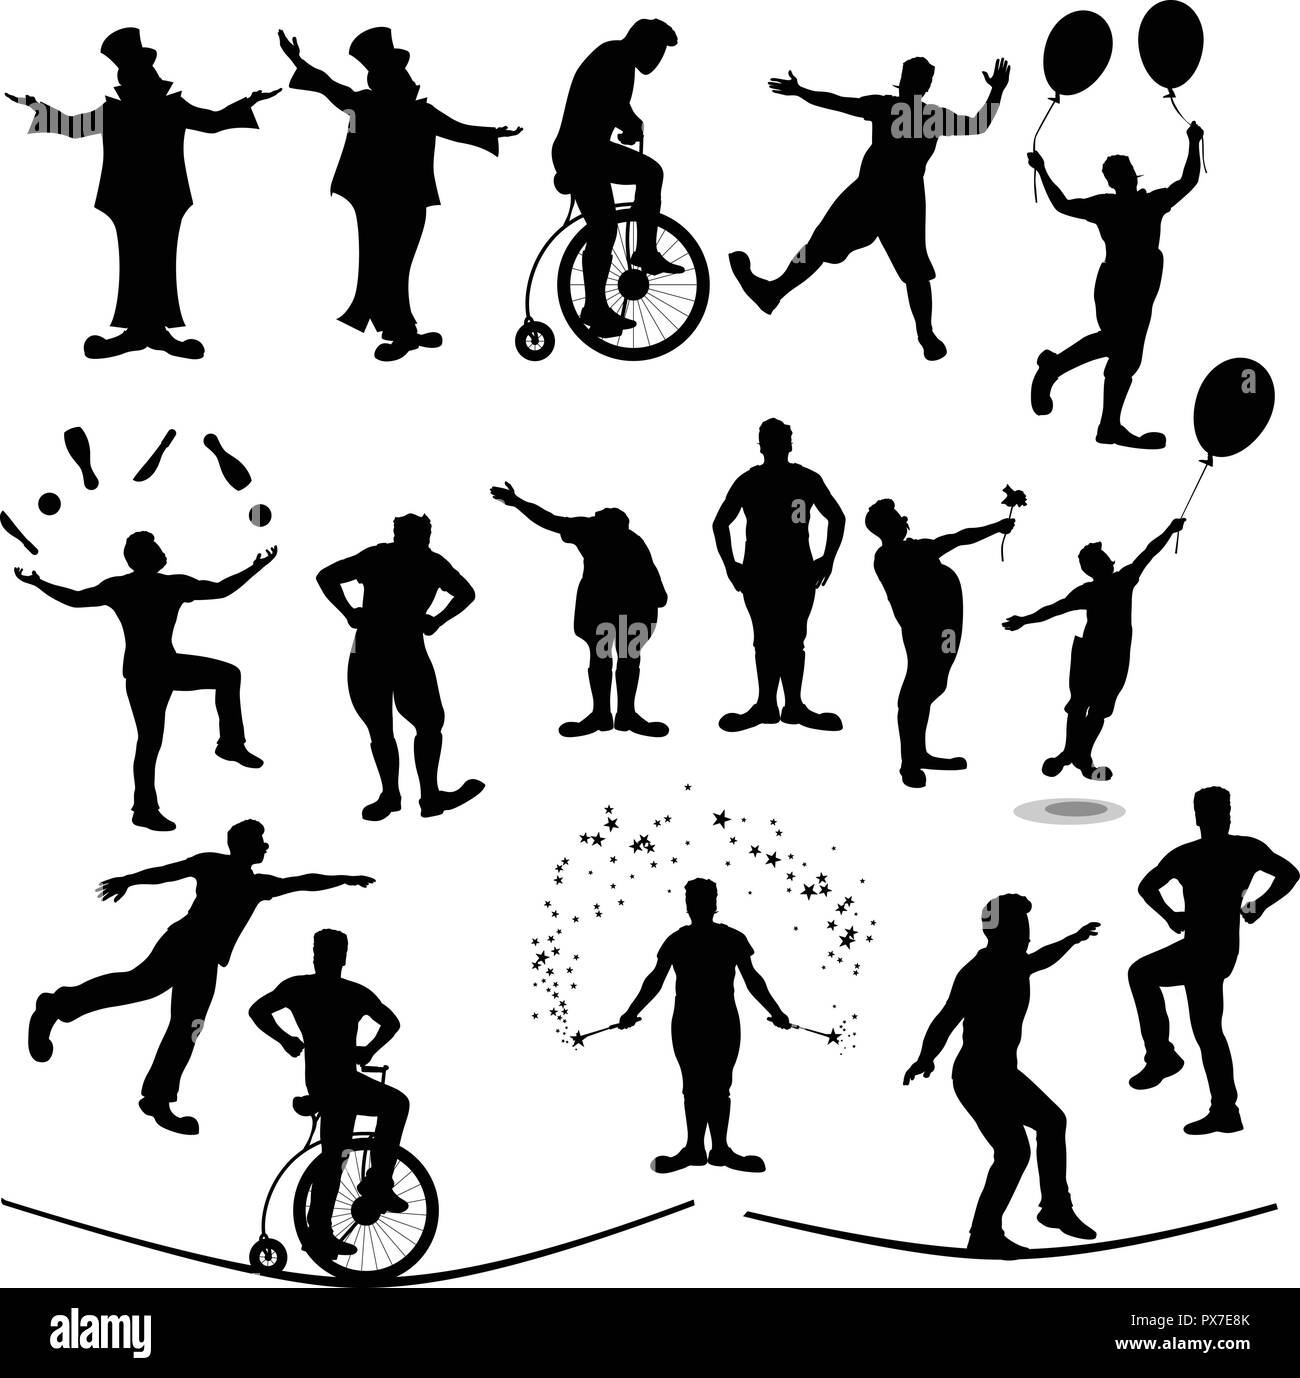 circus people silhouette Stock Vector